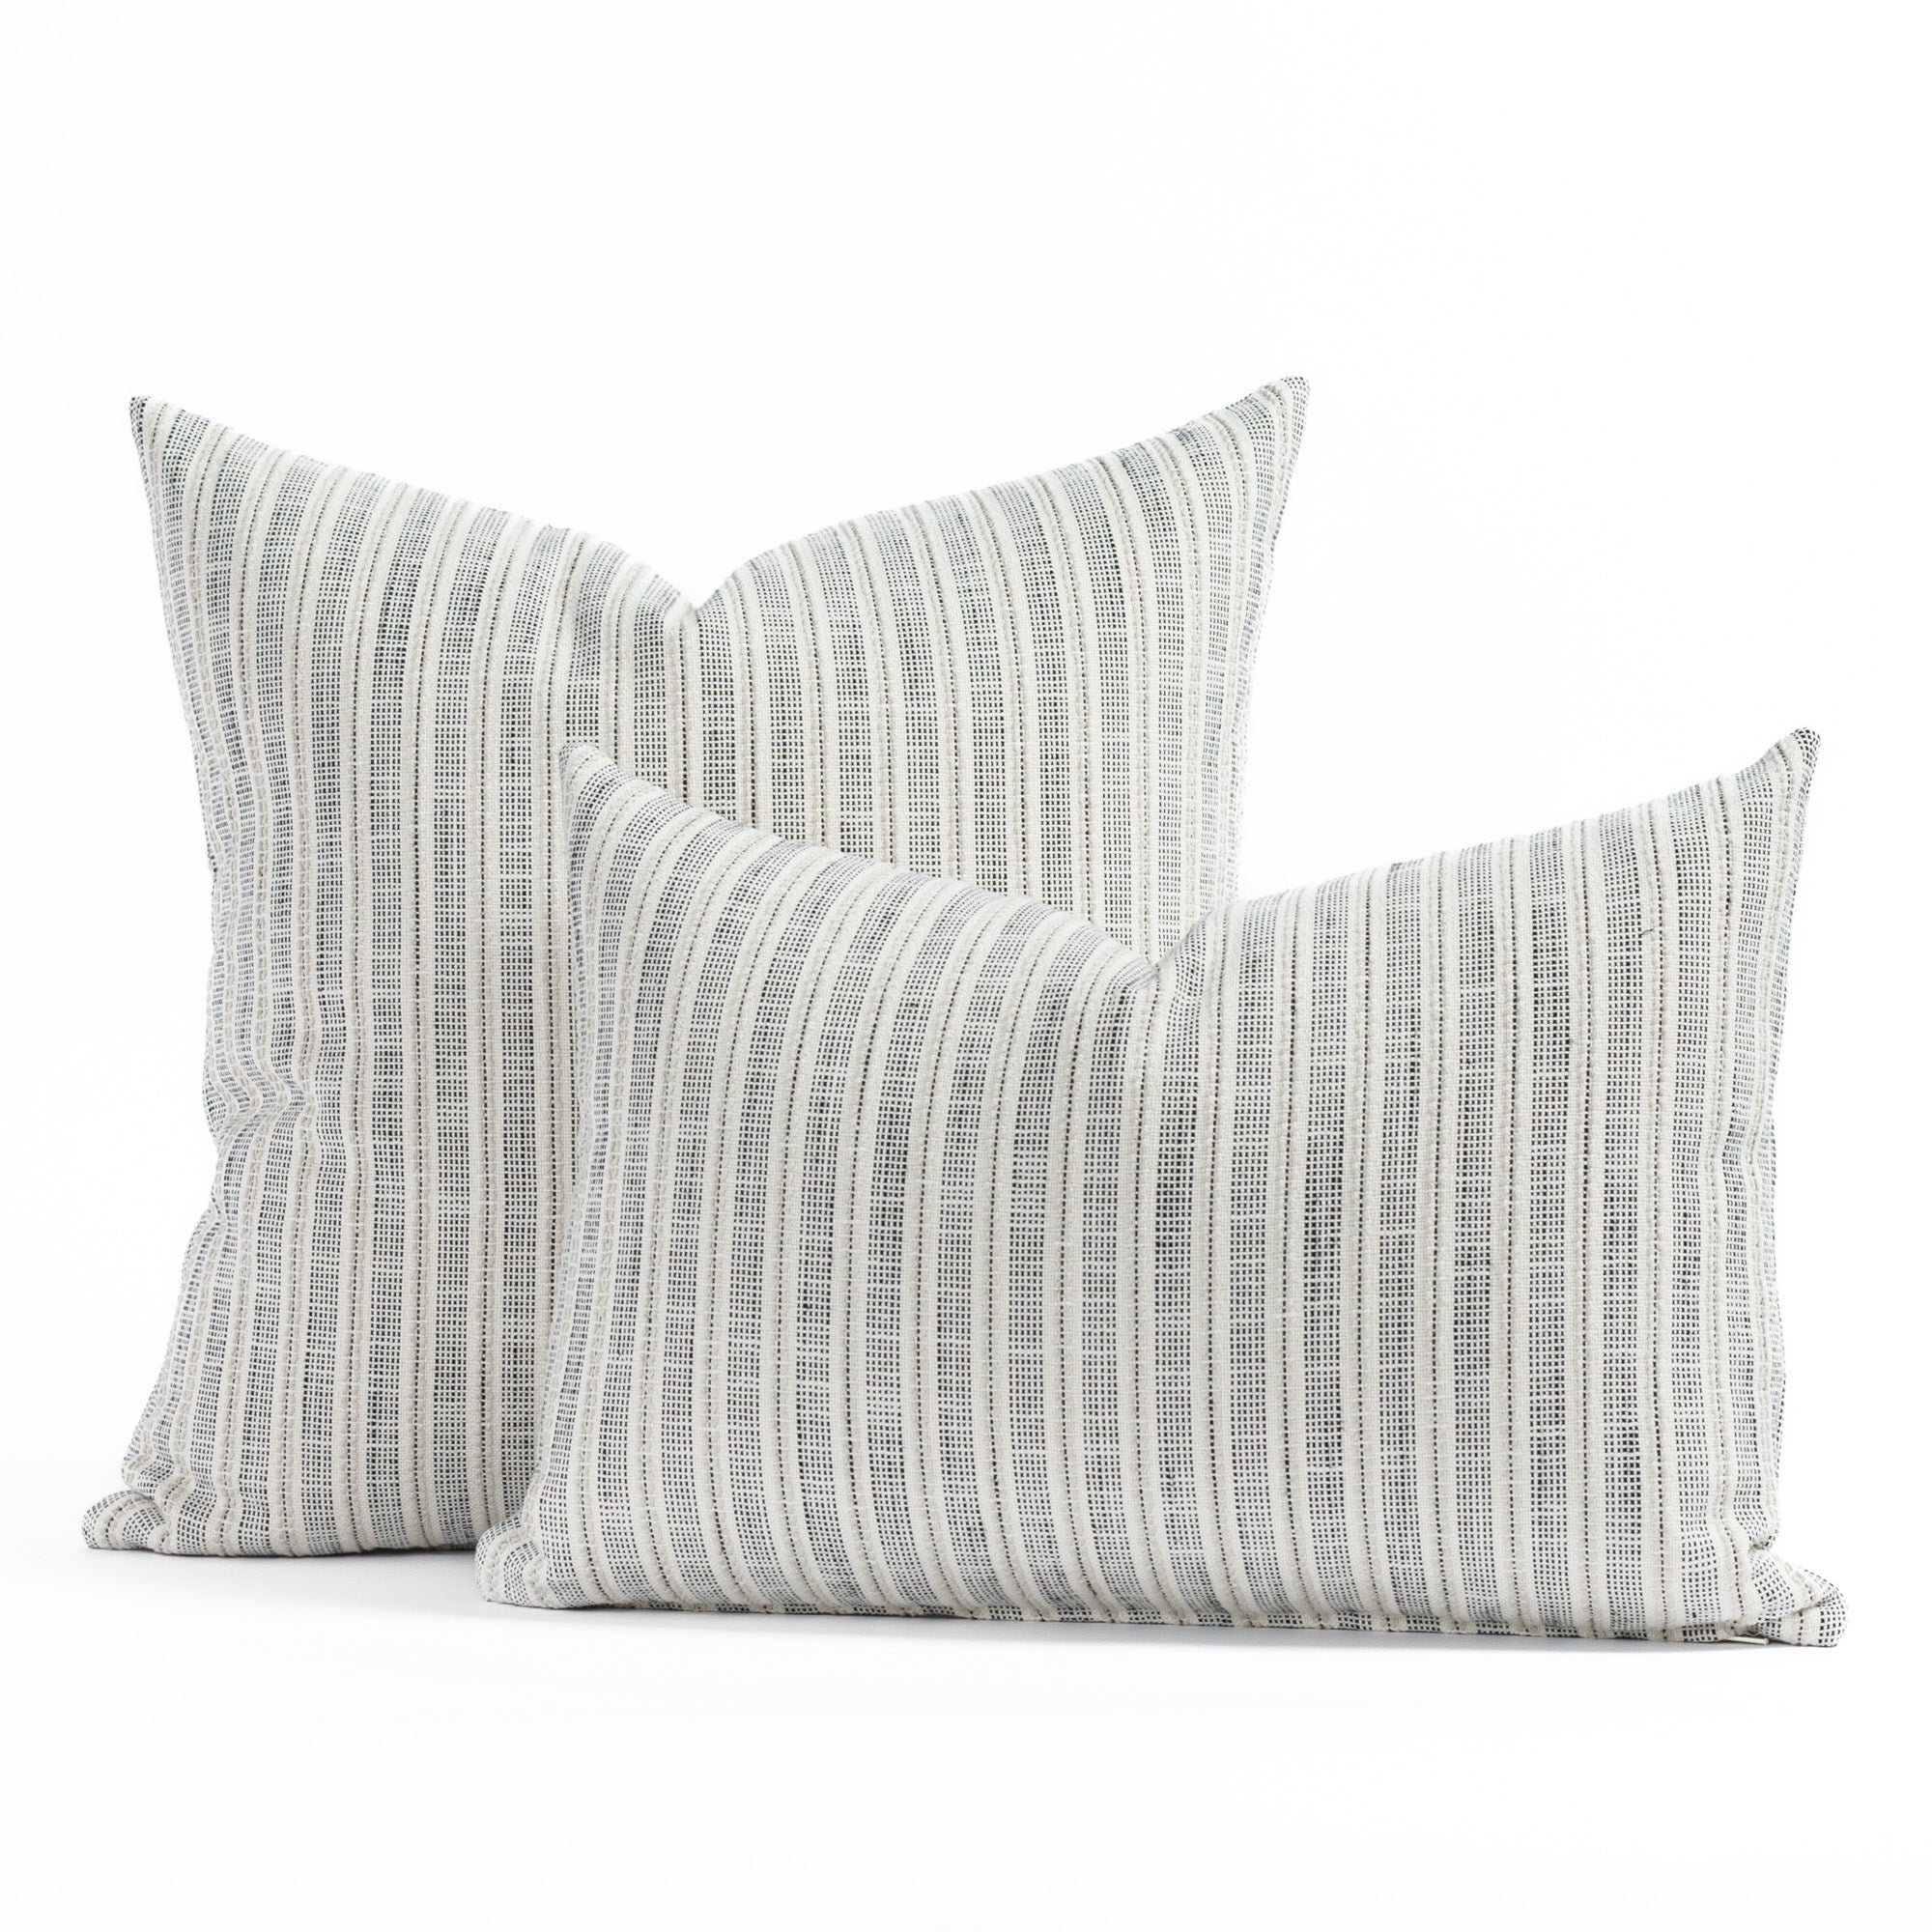 Amalfi Stripe cream and black striped outdoor throw pillow in two sizes from Tonic Living